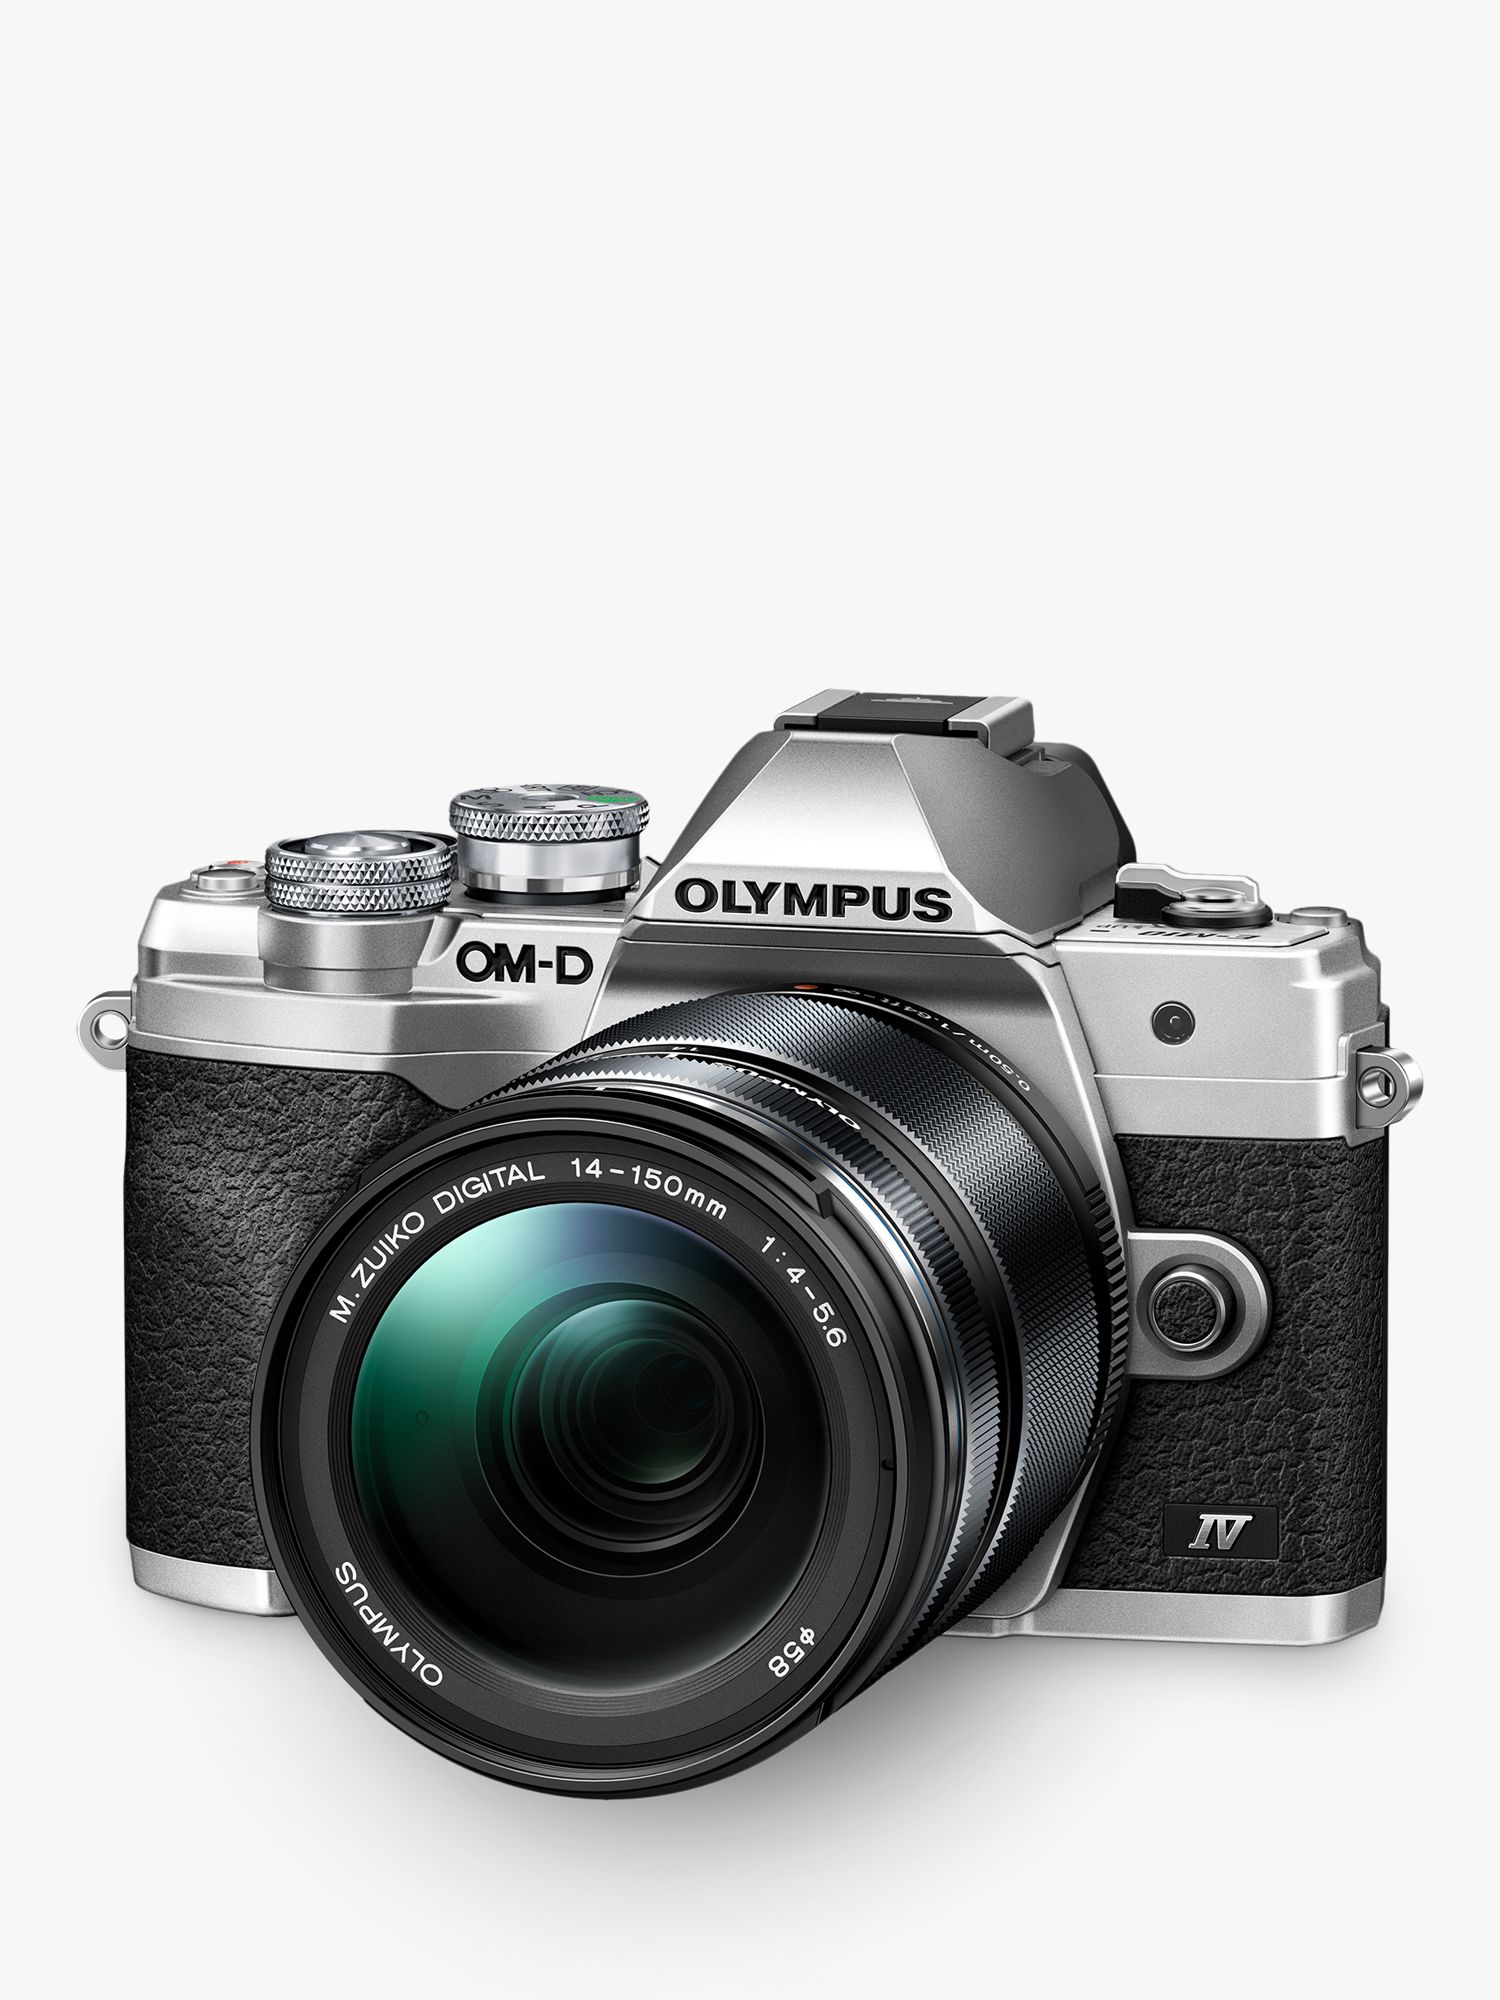 Image of Olympus OMD EM10 Mark IV Compact System Camera with 14150mm Lens 4K Ultra HD 203MP WiFi Bluetooth EVF 3 LCD Tiltable Touch Screen Black